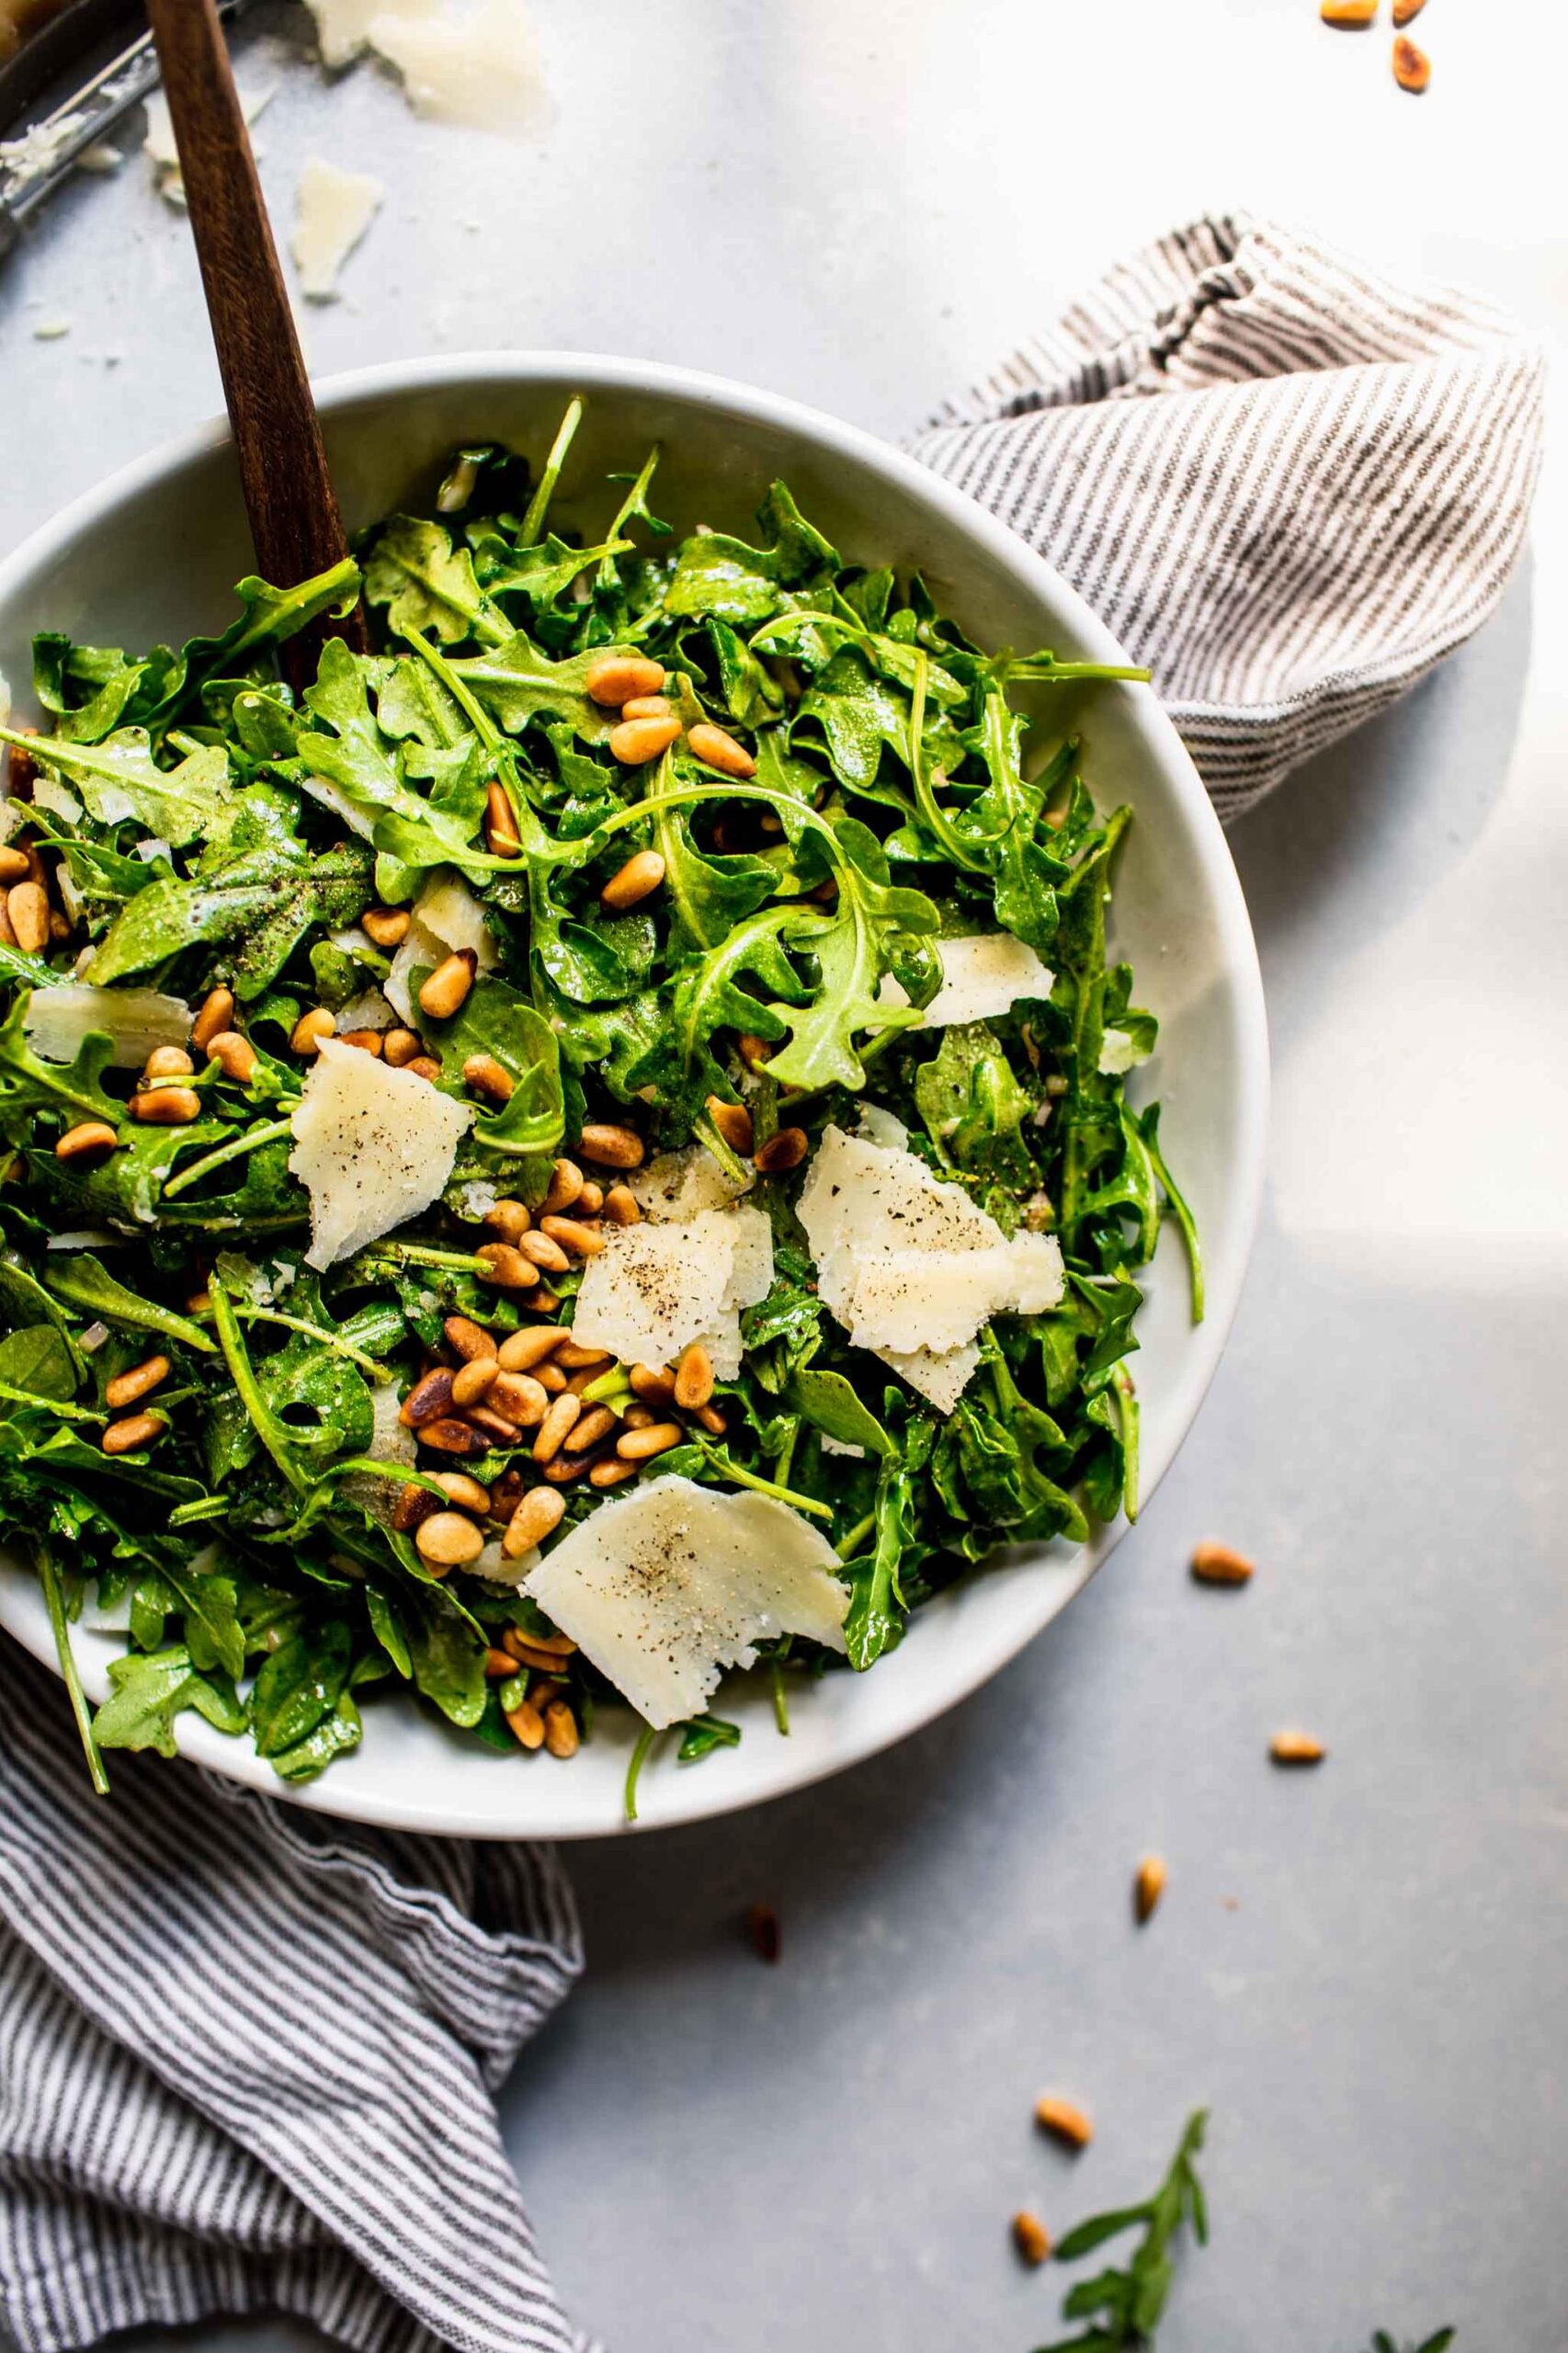  This arugula salad with wine and cheese dressing will become a regular on your summer dinner rotation.